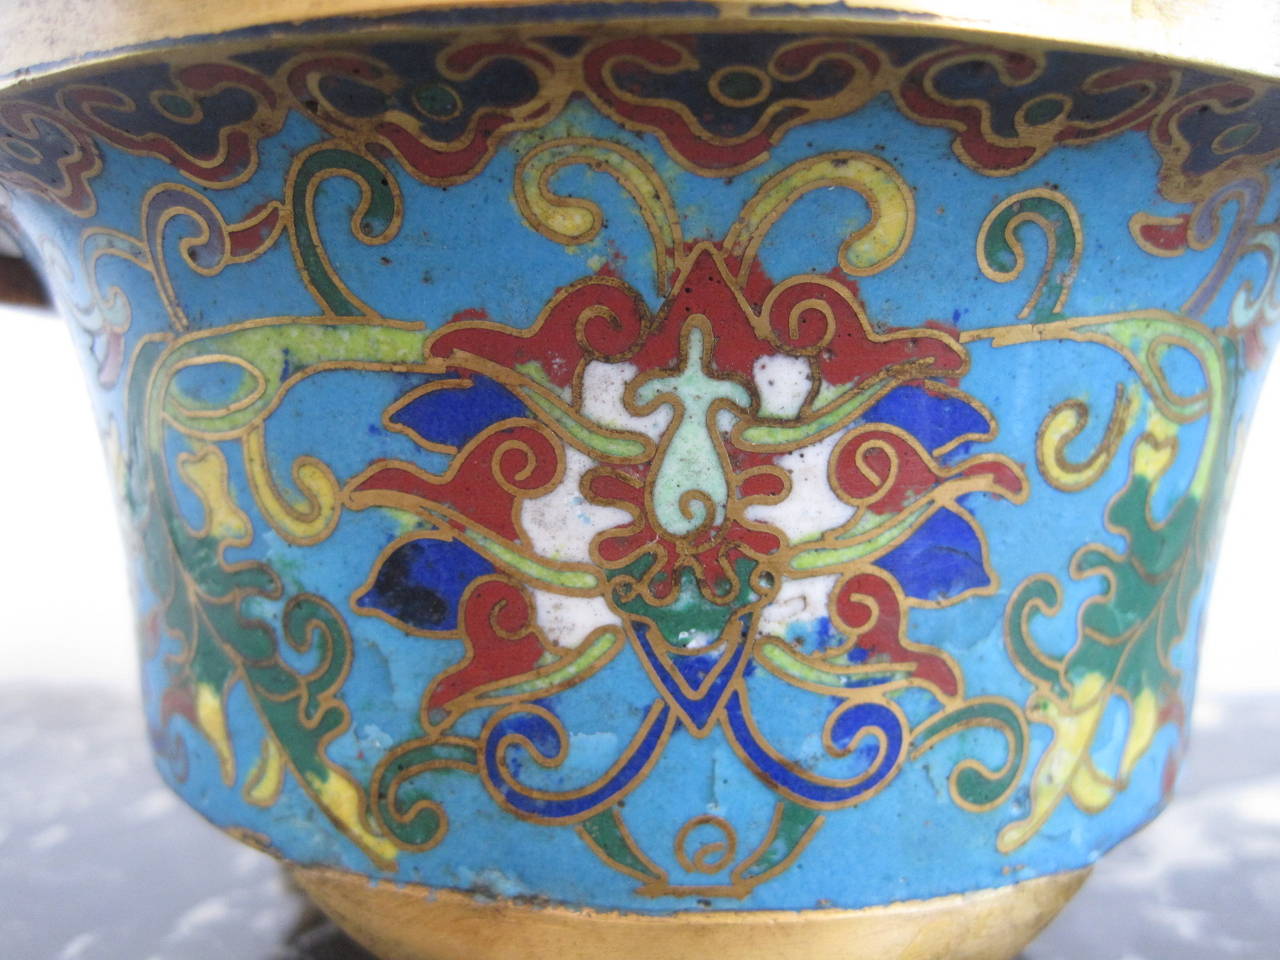 Chinese Gilt Bronze Cloisonne Tripod Censer with Xuande Mark

19th Century Incense burner decorated in coloured enamels with numerous flower sprays.

Free shipping within the United States and Canada.